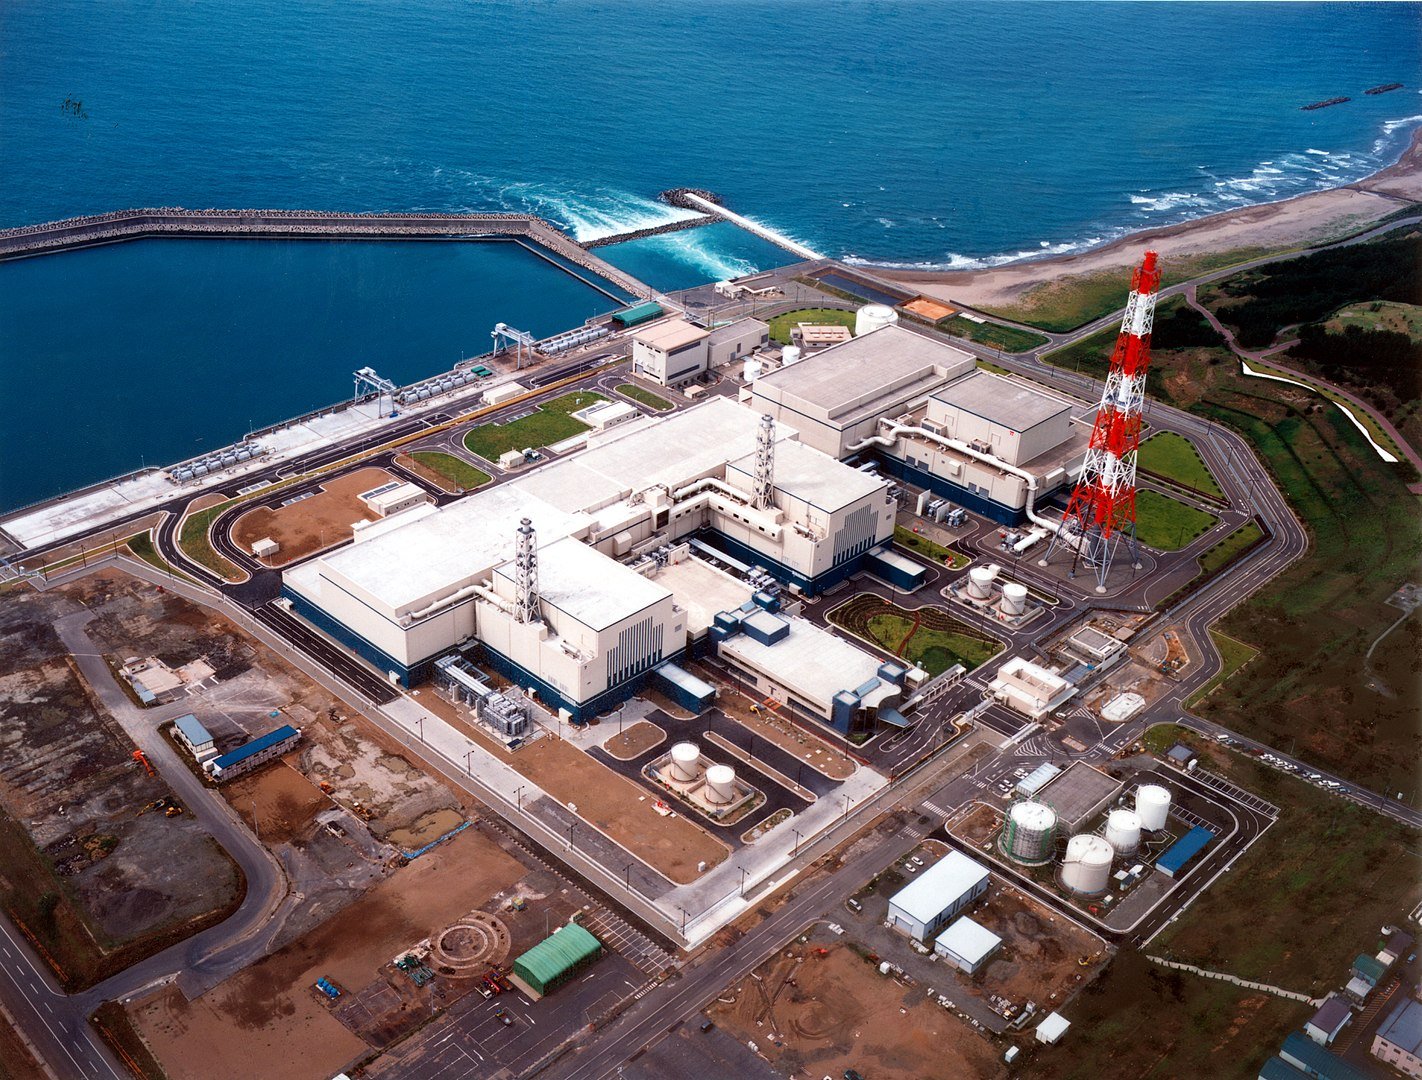 Worlds biggest nuclear plant in Japan to resume path towards restart